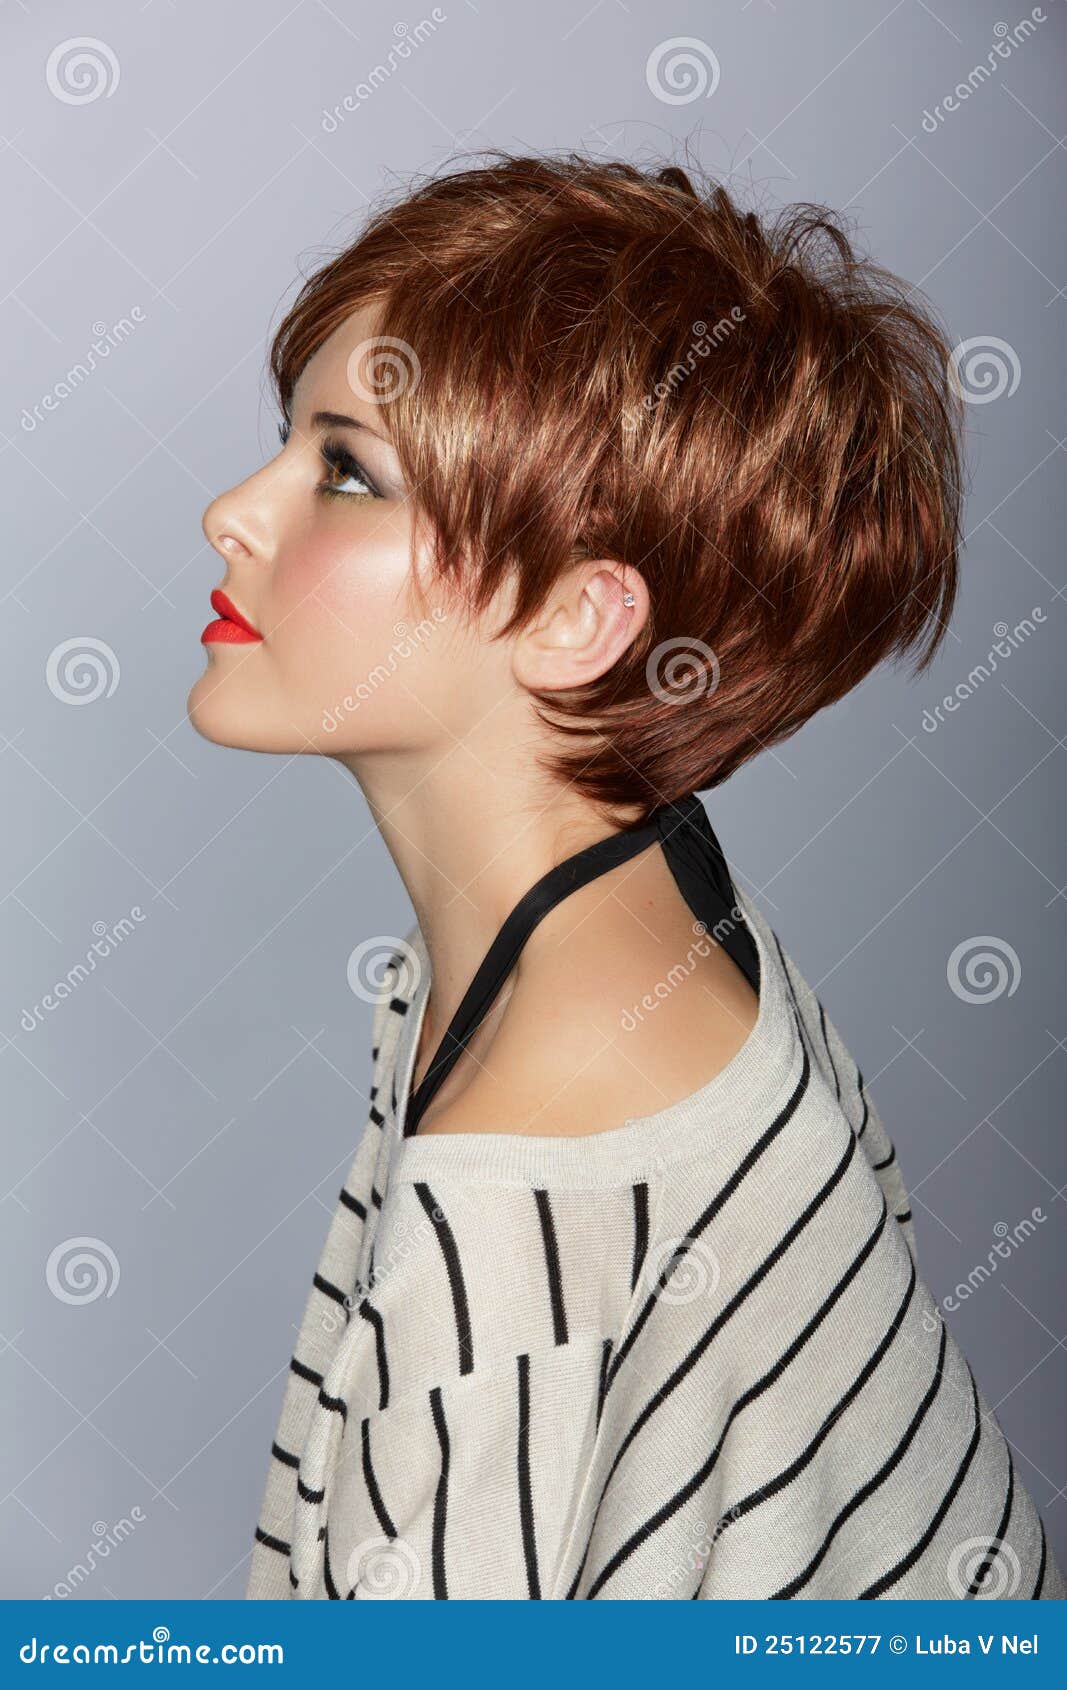 woman with short red hair